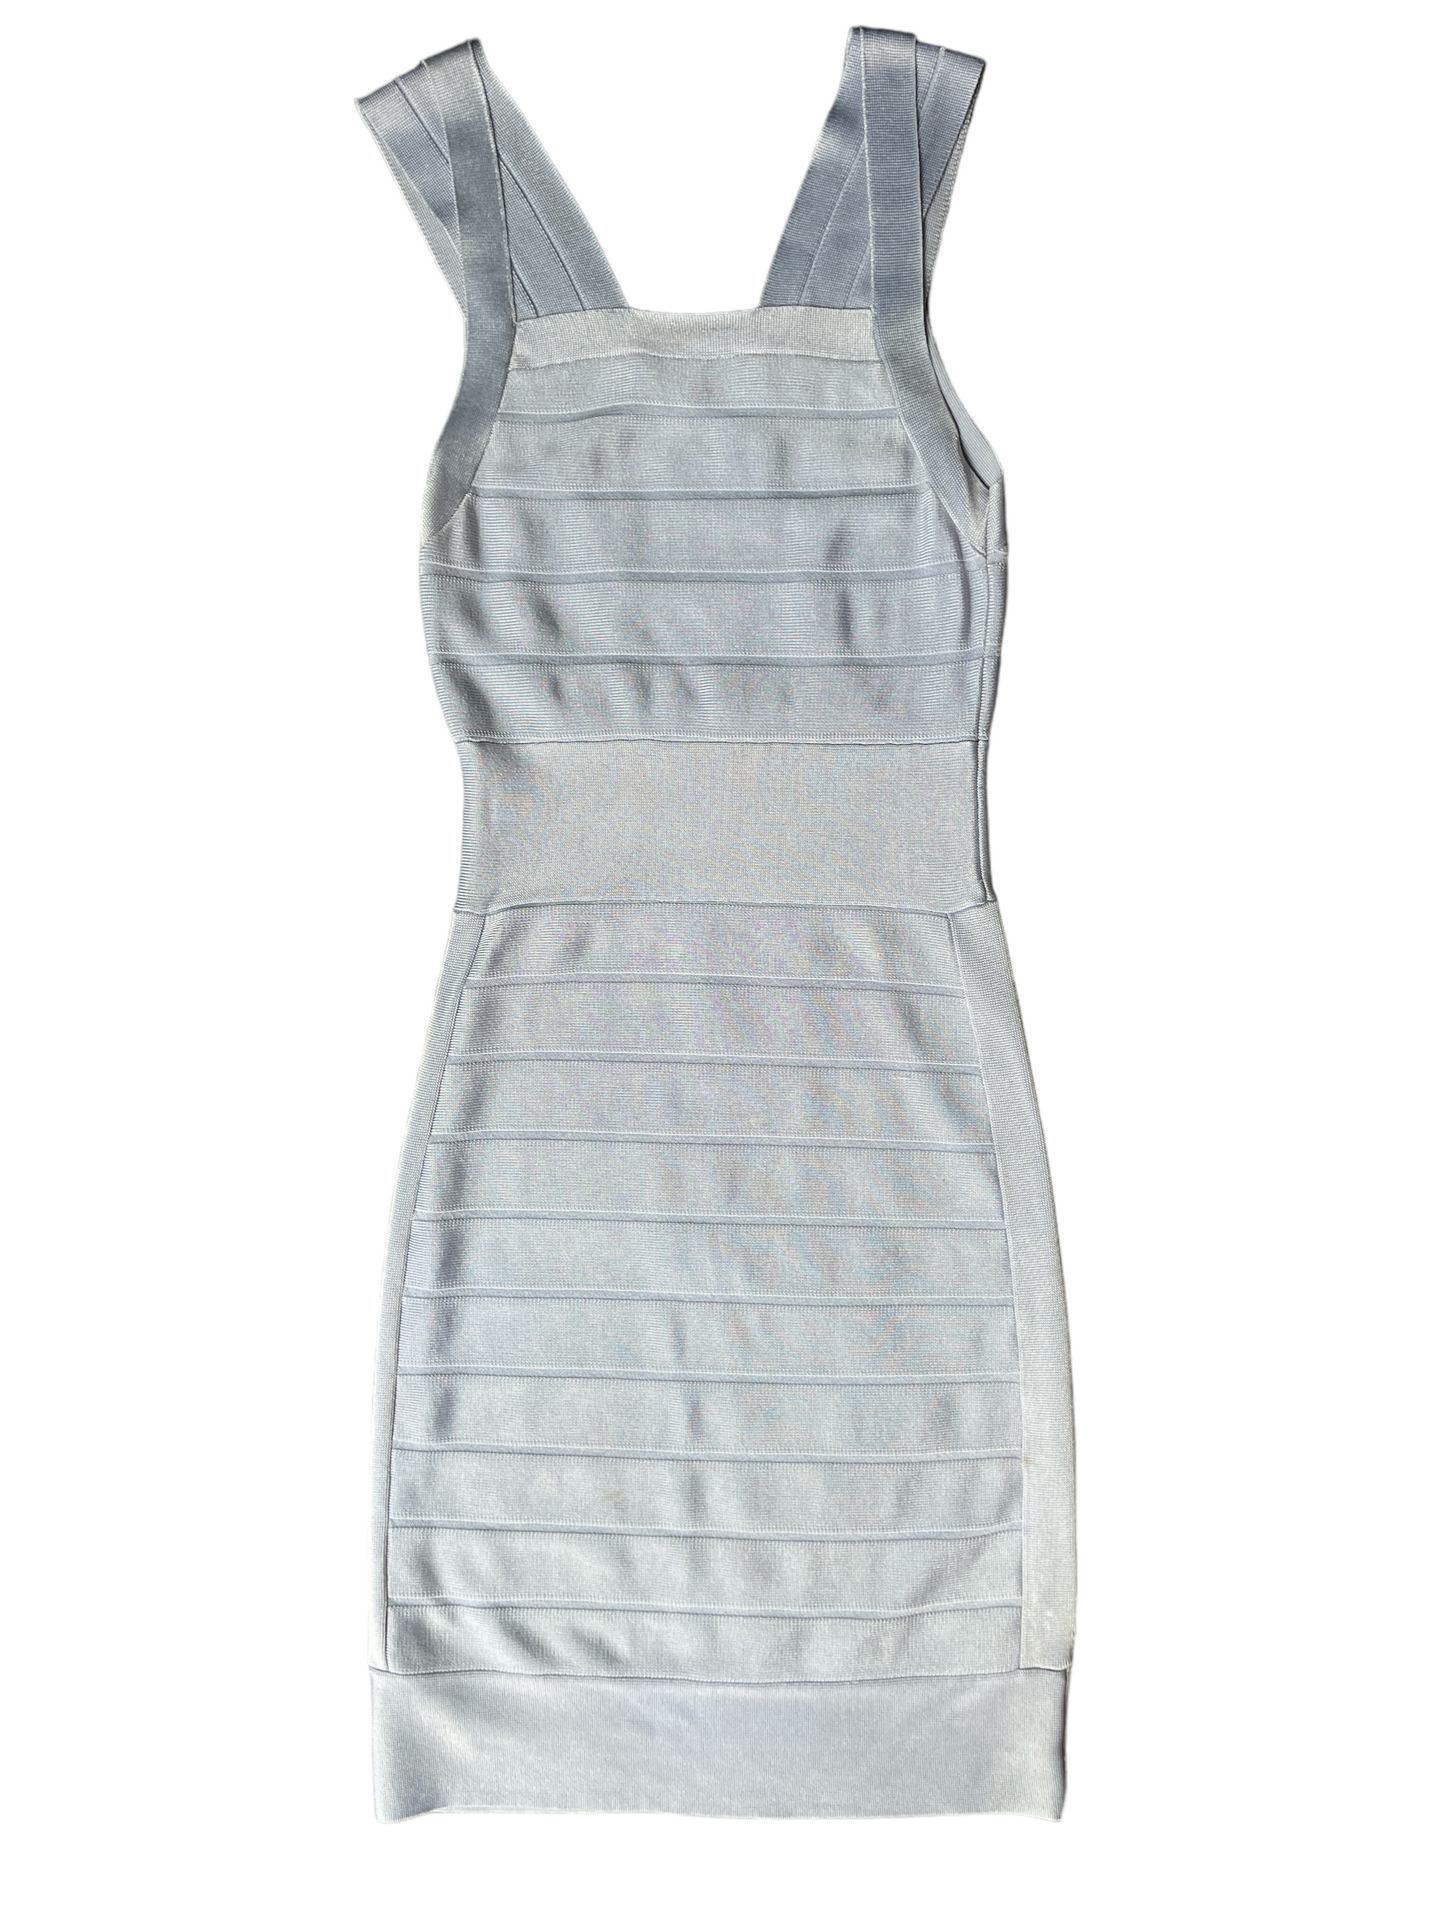 French Connection Silver Detailed Form Fitting Dress Size 4.